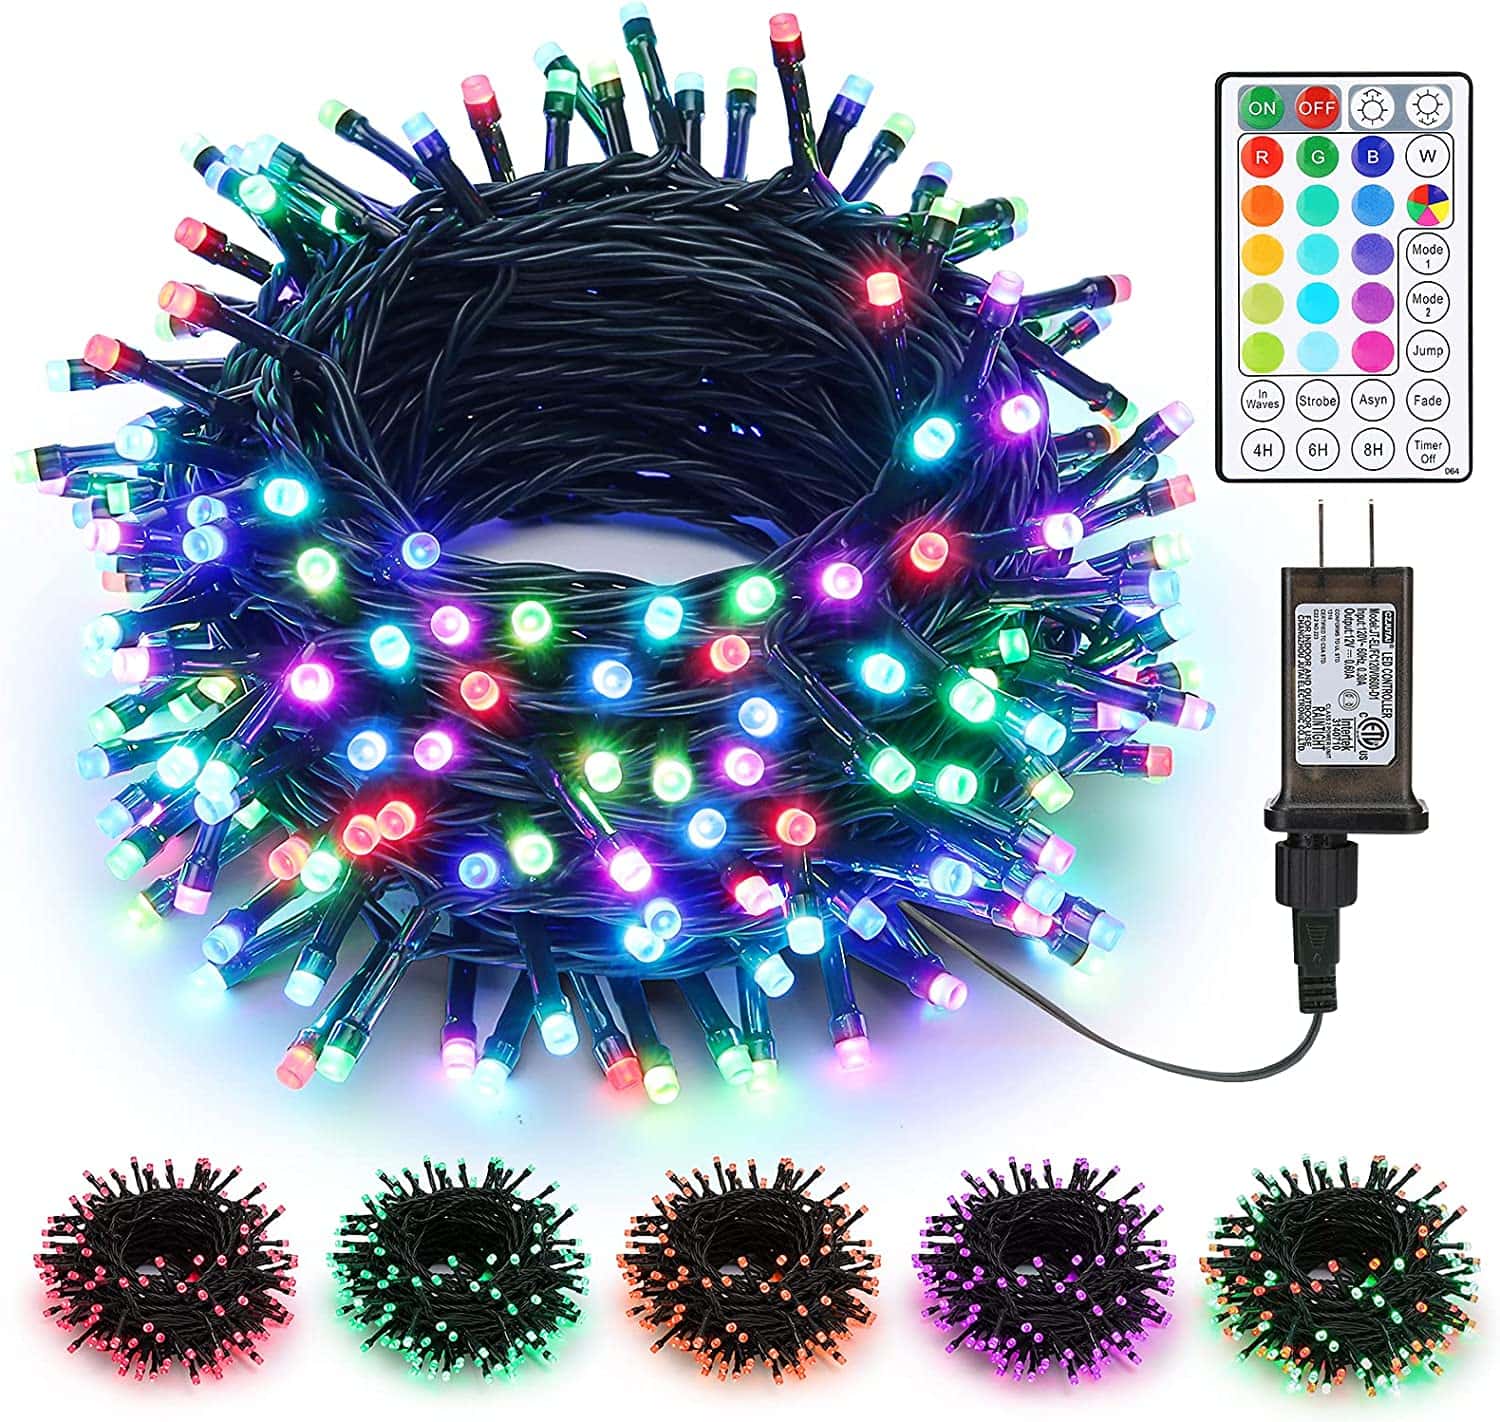 LED string lights with a remote